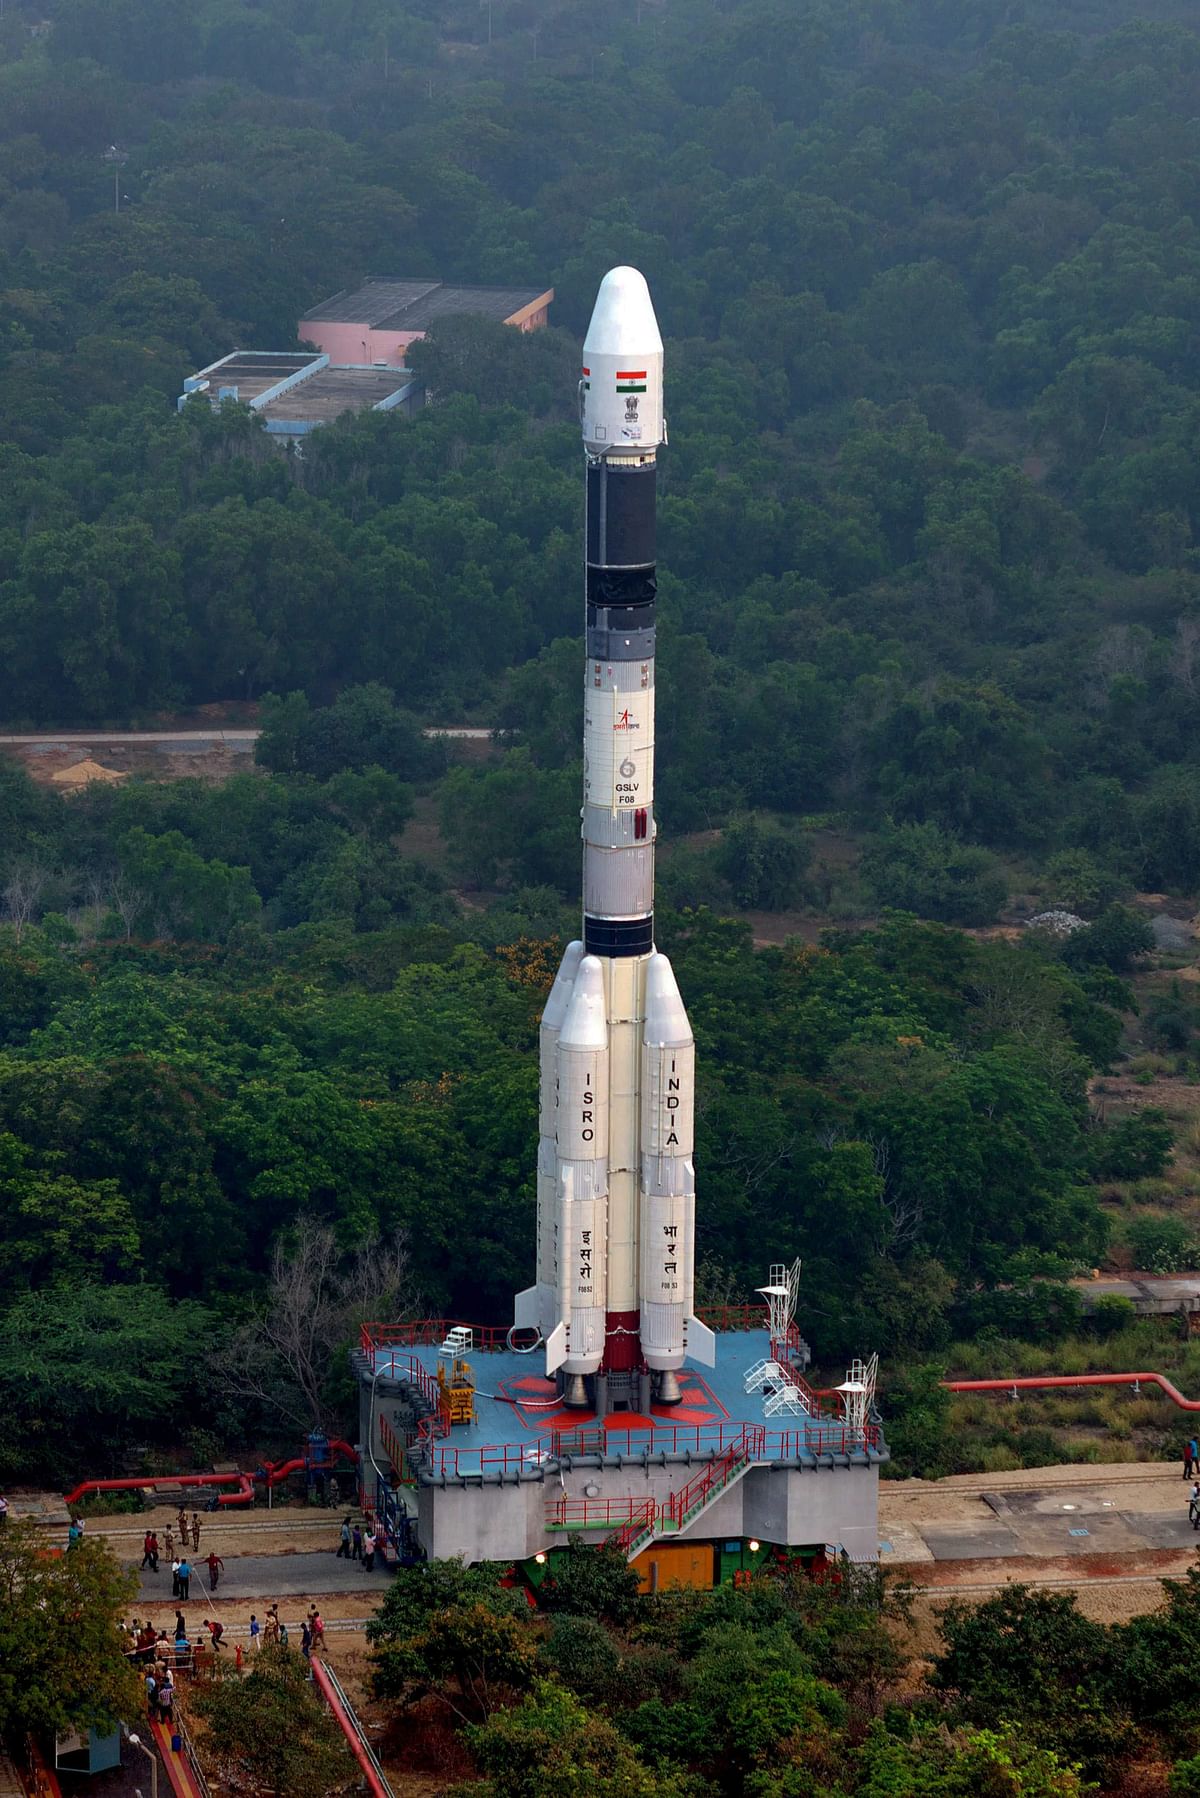 Indian Space Research Organisation (ISRO) successfully launched the GSAT 6A communication satellite from Sriharikota